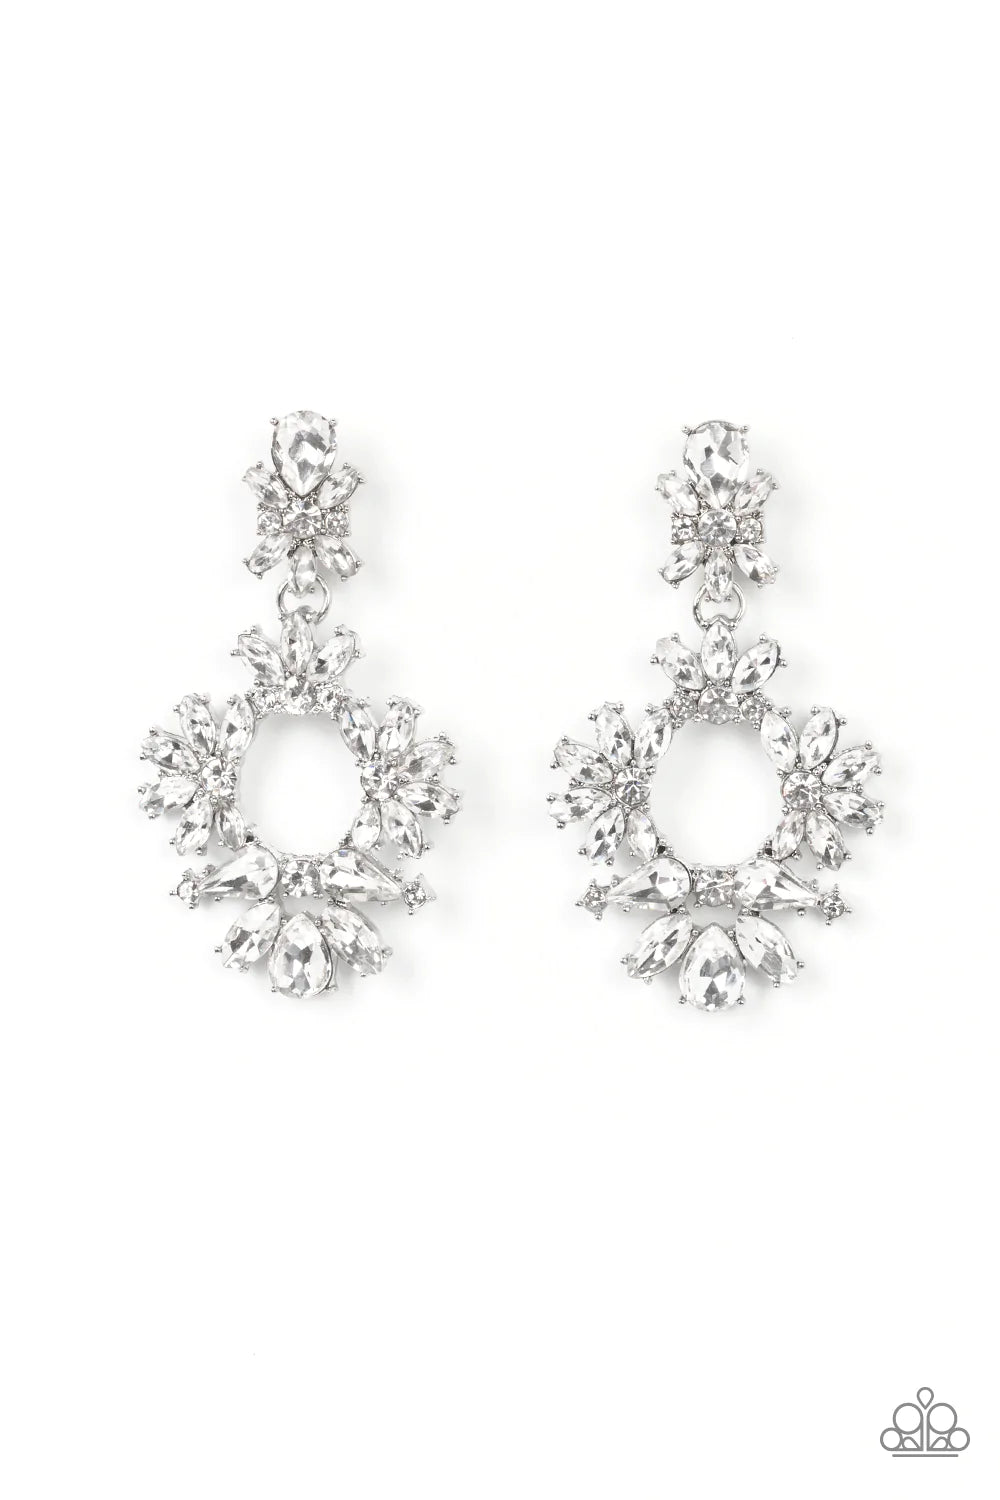 Leave them Speechless ♥ White Post Earrings ♥ Paparazzi Accessories - GlaMarous Titi Jewels